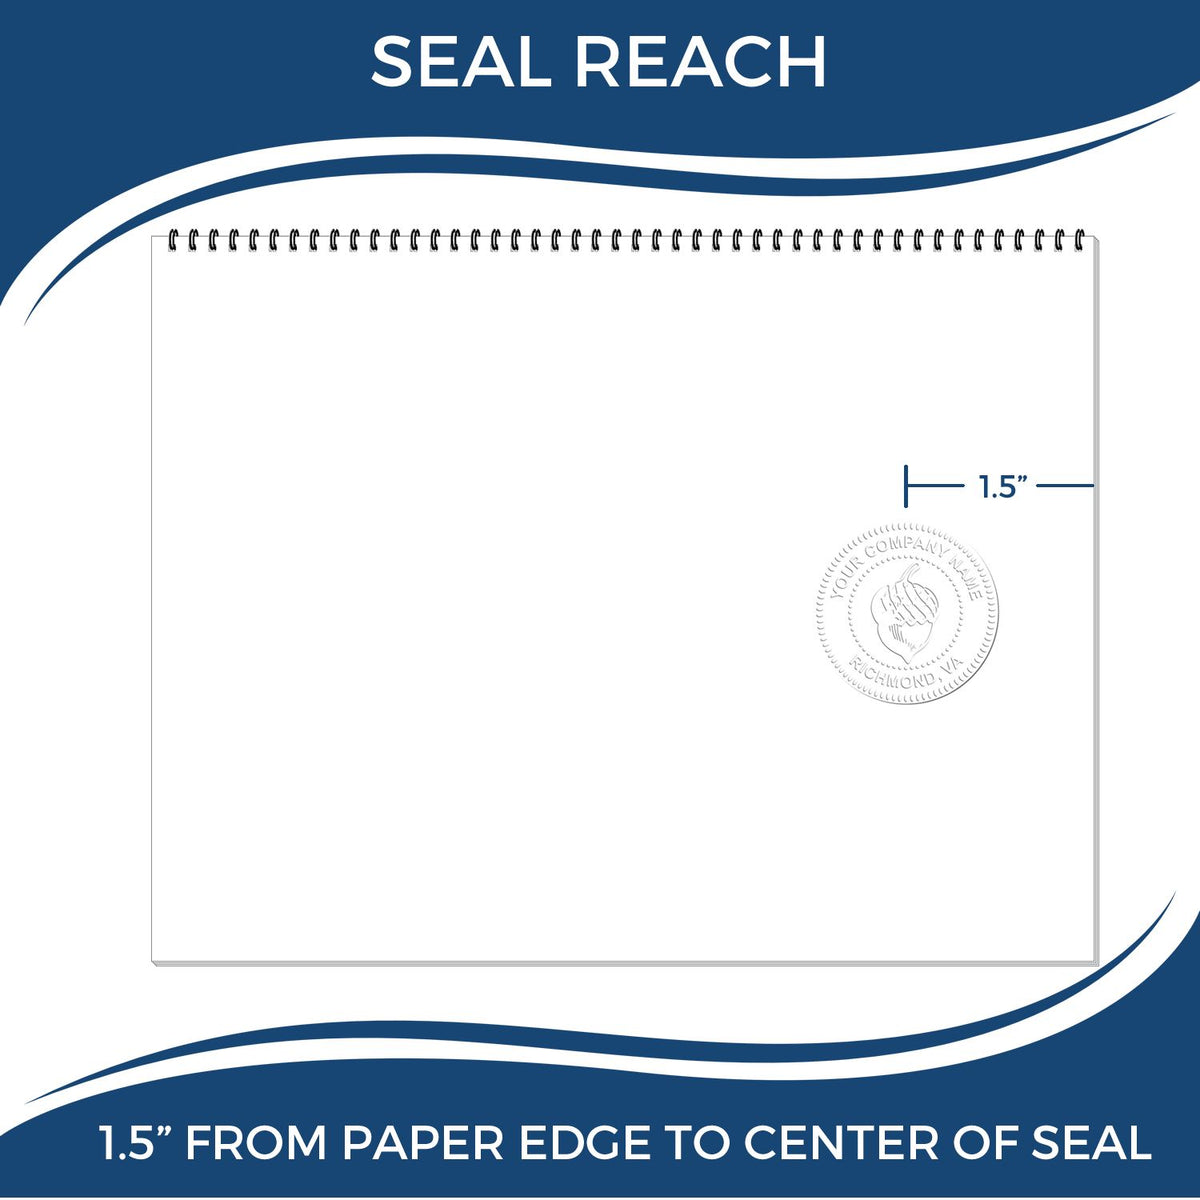 An infographic showing the seal reach which is represented by a ruler and a miniature seal image of the State of North Dakota Architectural Seal Embosser